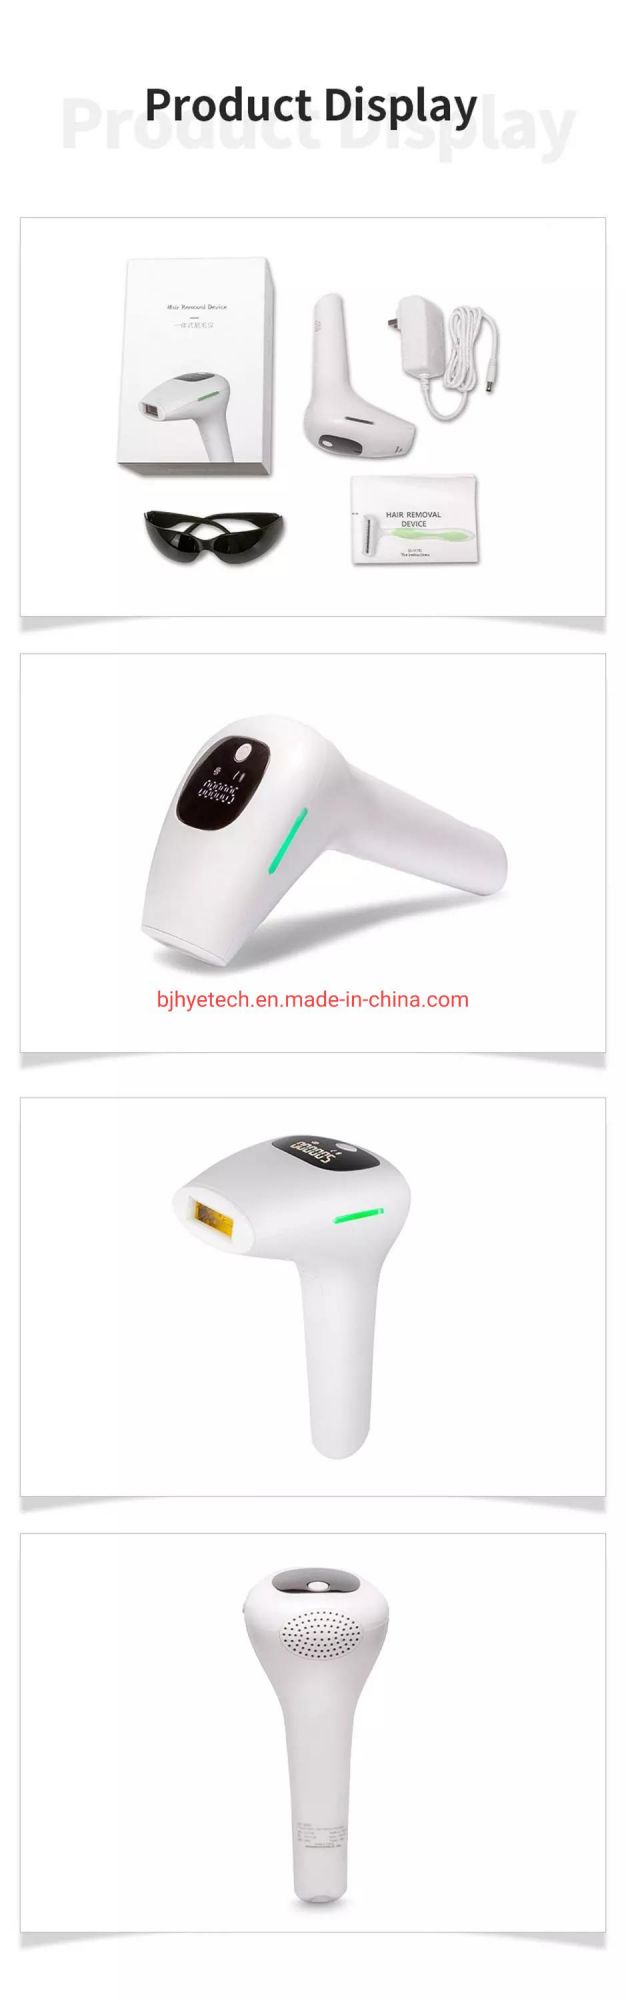 Mini Home Use Laser IPL Hair Removal Permanent Photon Hair Remover for Skin Beauty Machine